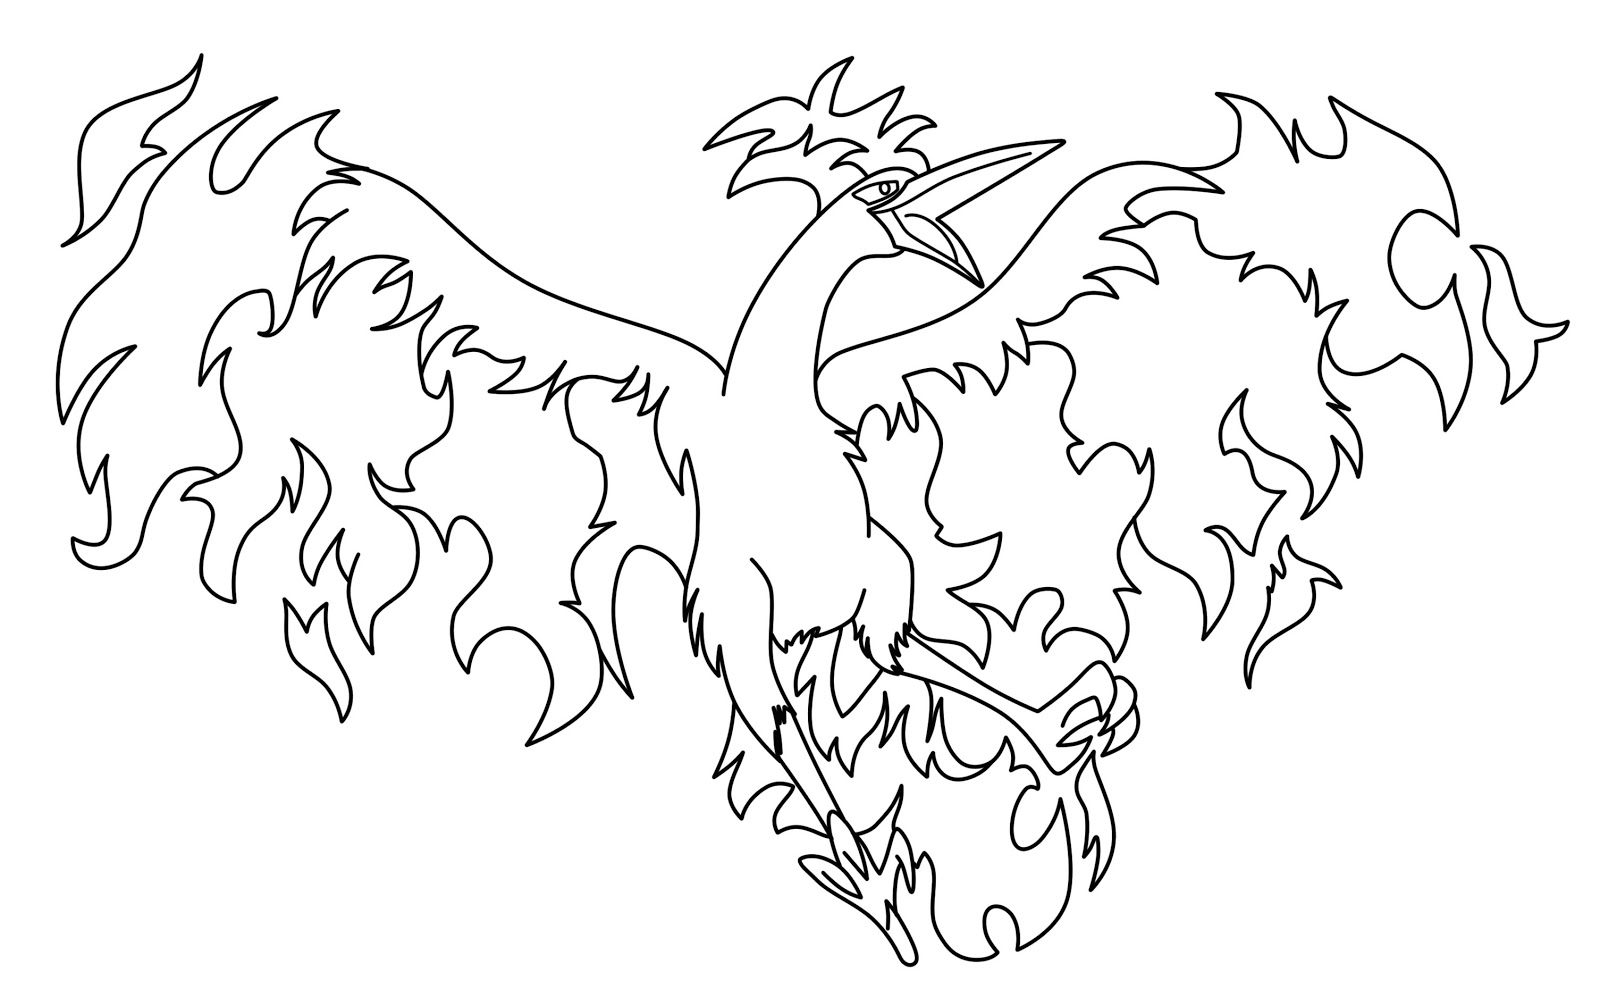 Moltres Pokemon Coloring Pages - Free Pokemon Coloring Pages